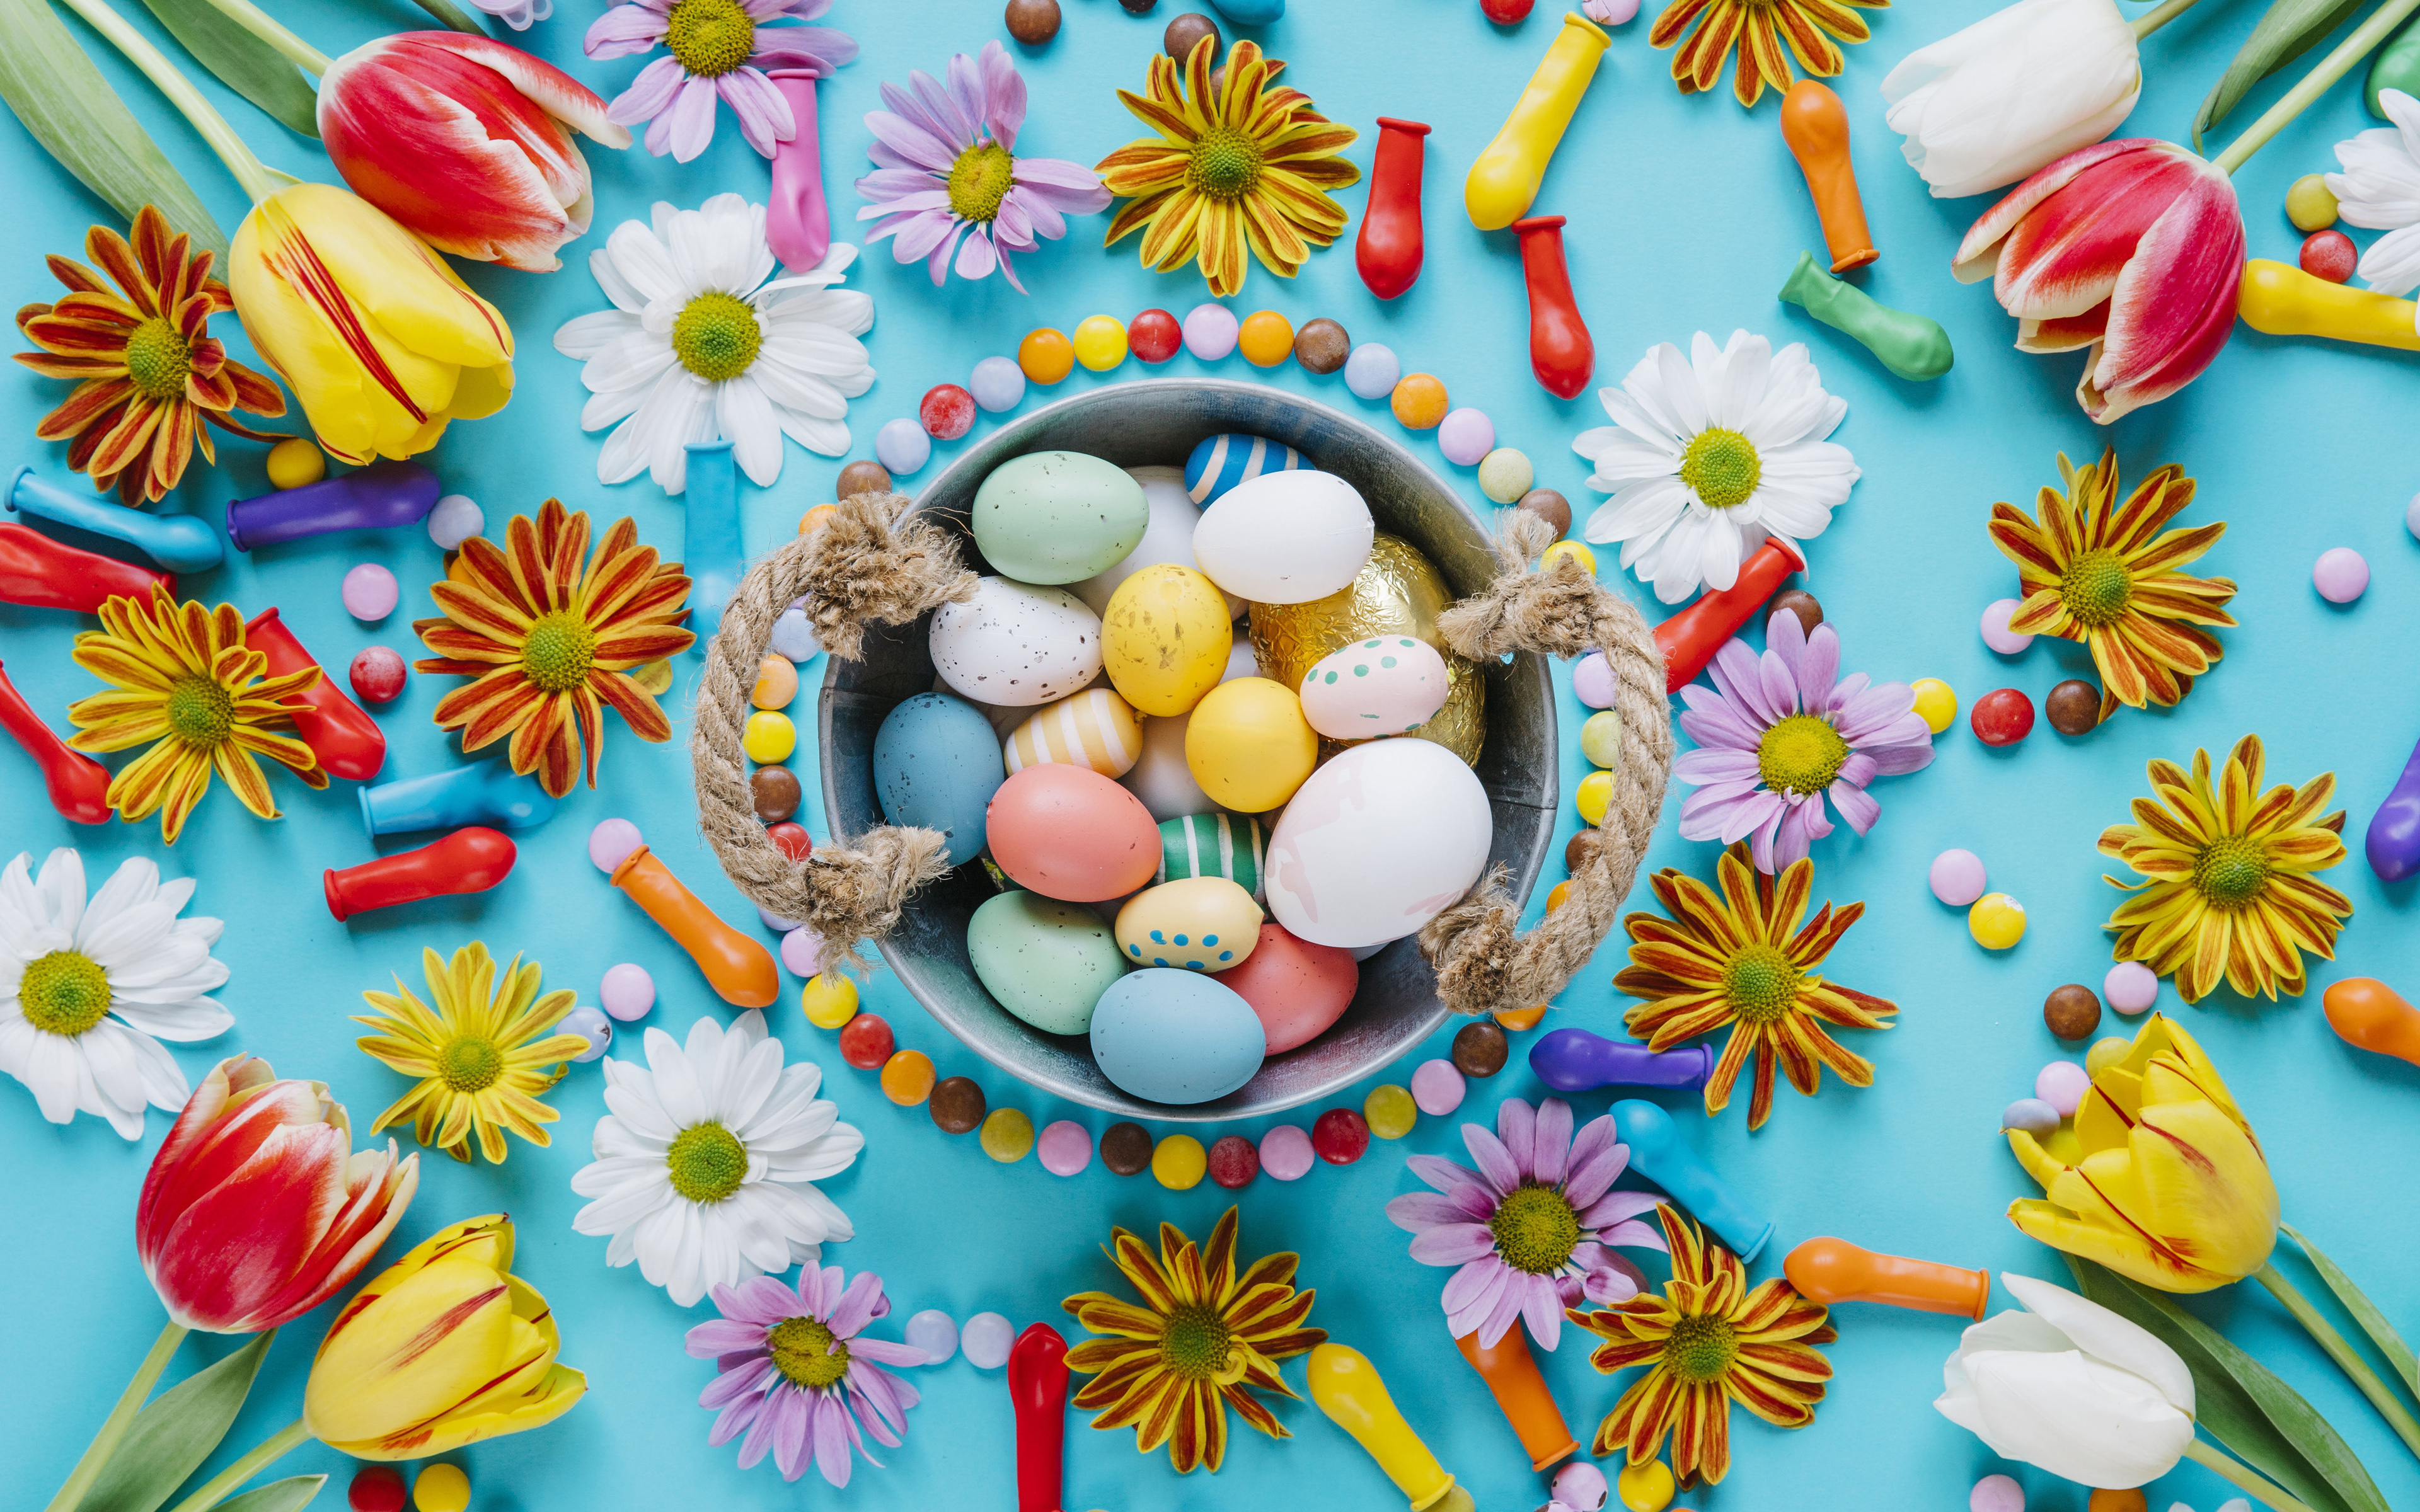 Download wallpaper Easter, 4k, flowers, Happy Easter, easter decoration, Easter eggs for desktop with resolution 3840x2400. High Quality HD picture wallpaper